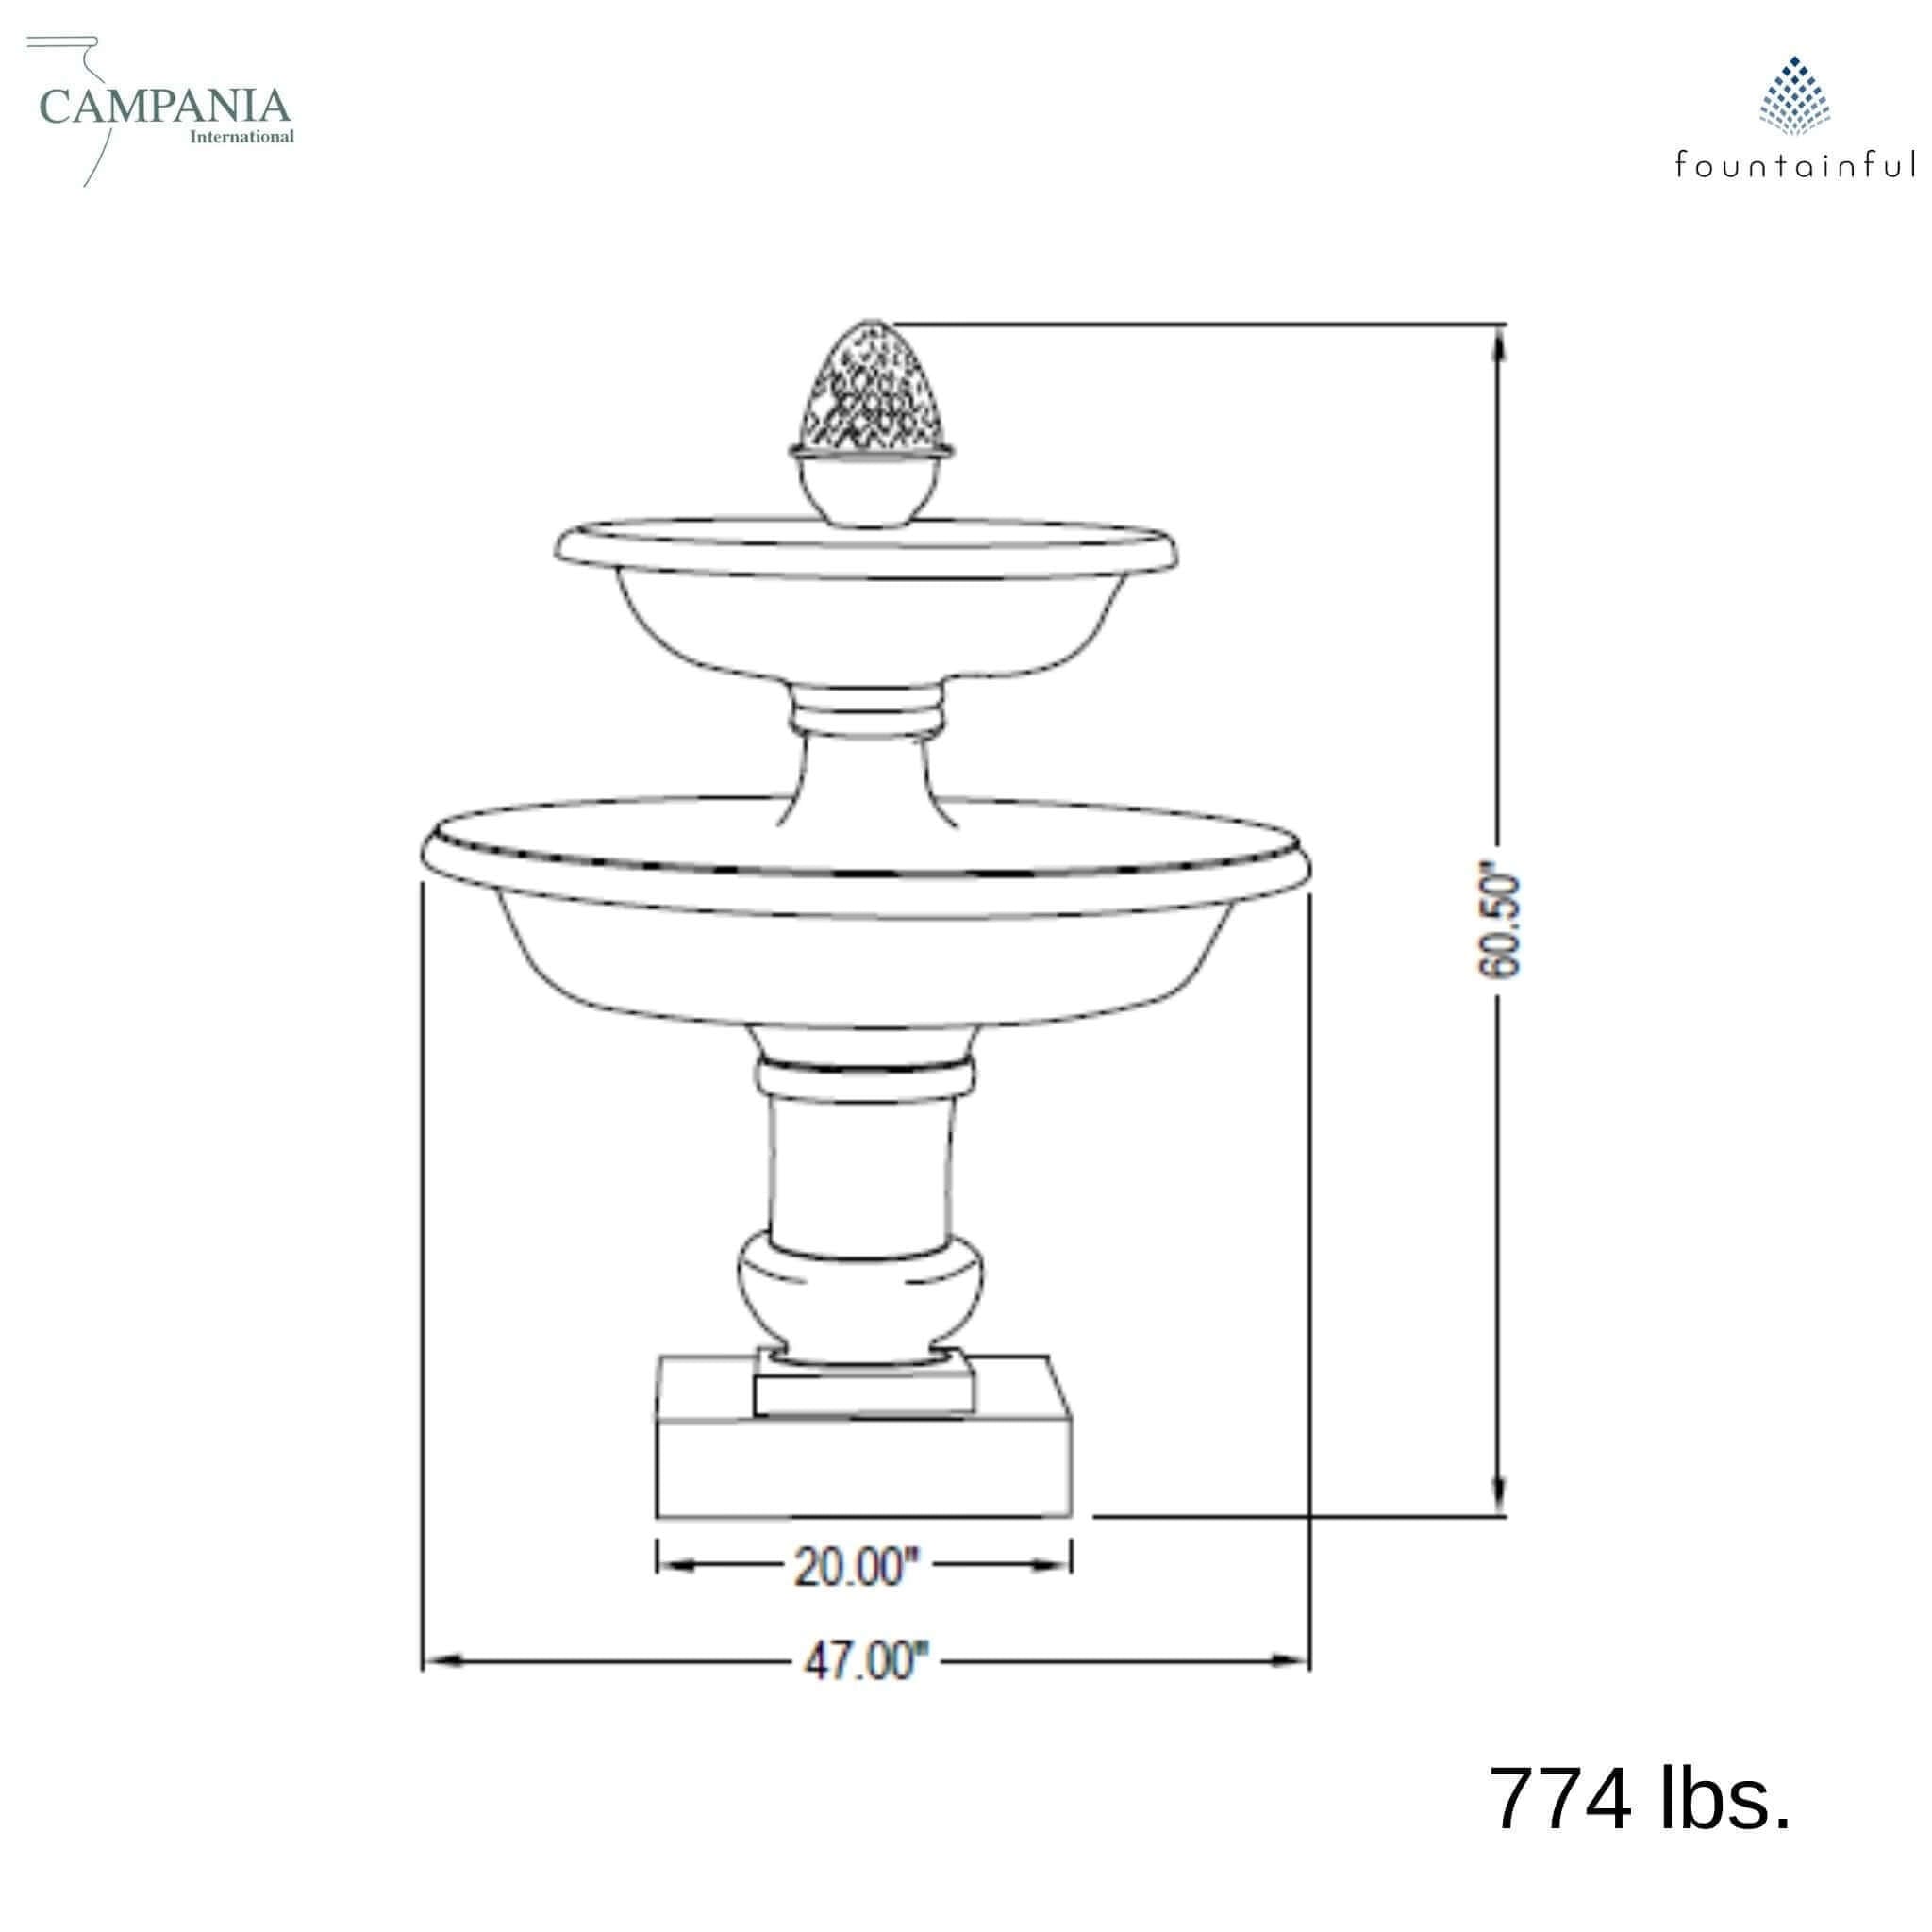 Wiltshire 2-Tier Concrete Fountain with Pinecone Finial - Campania #FT305